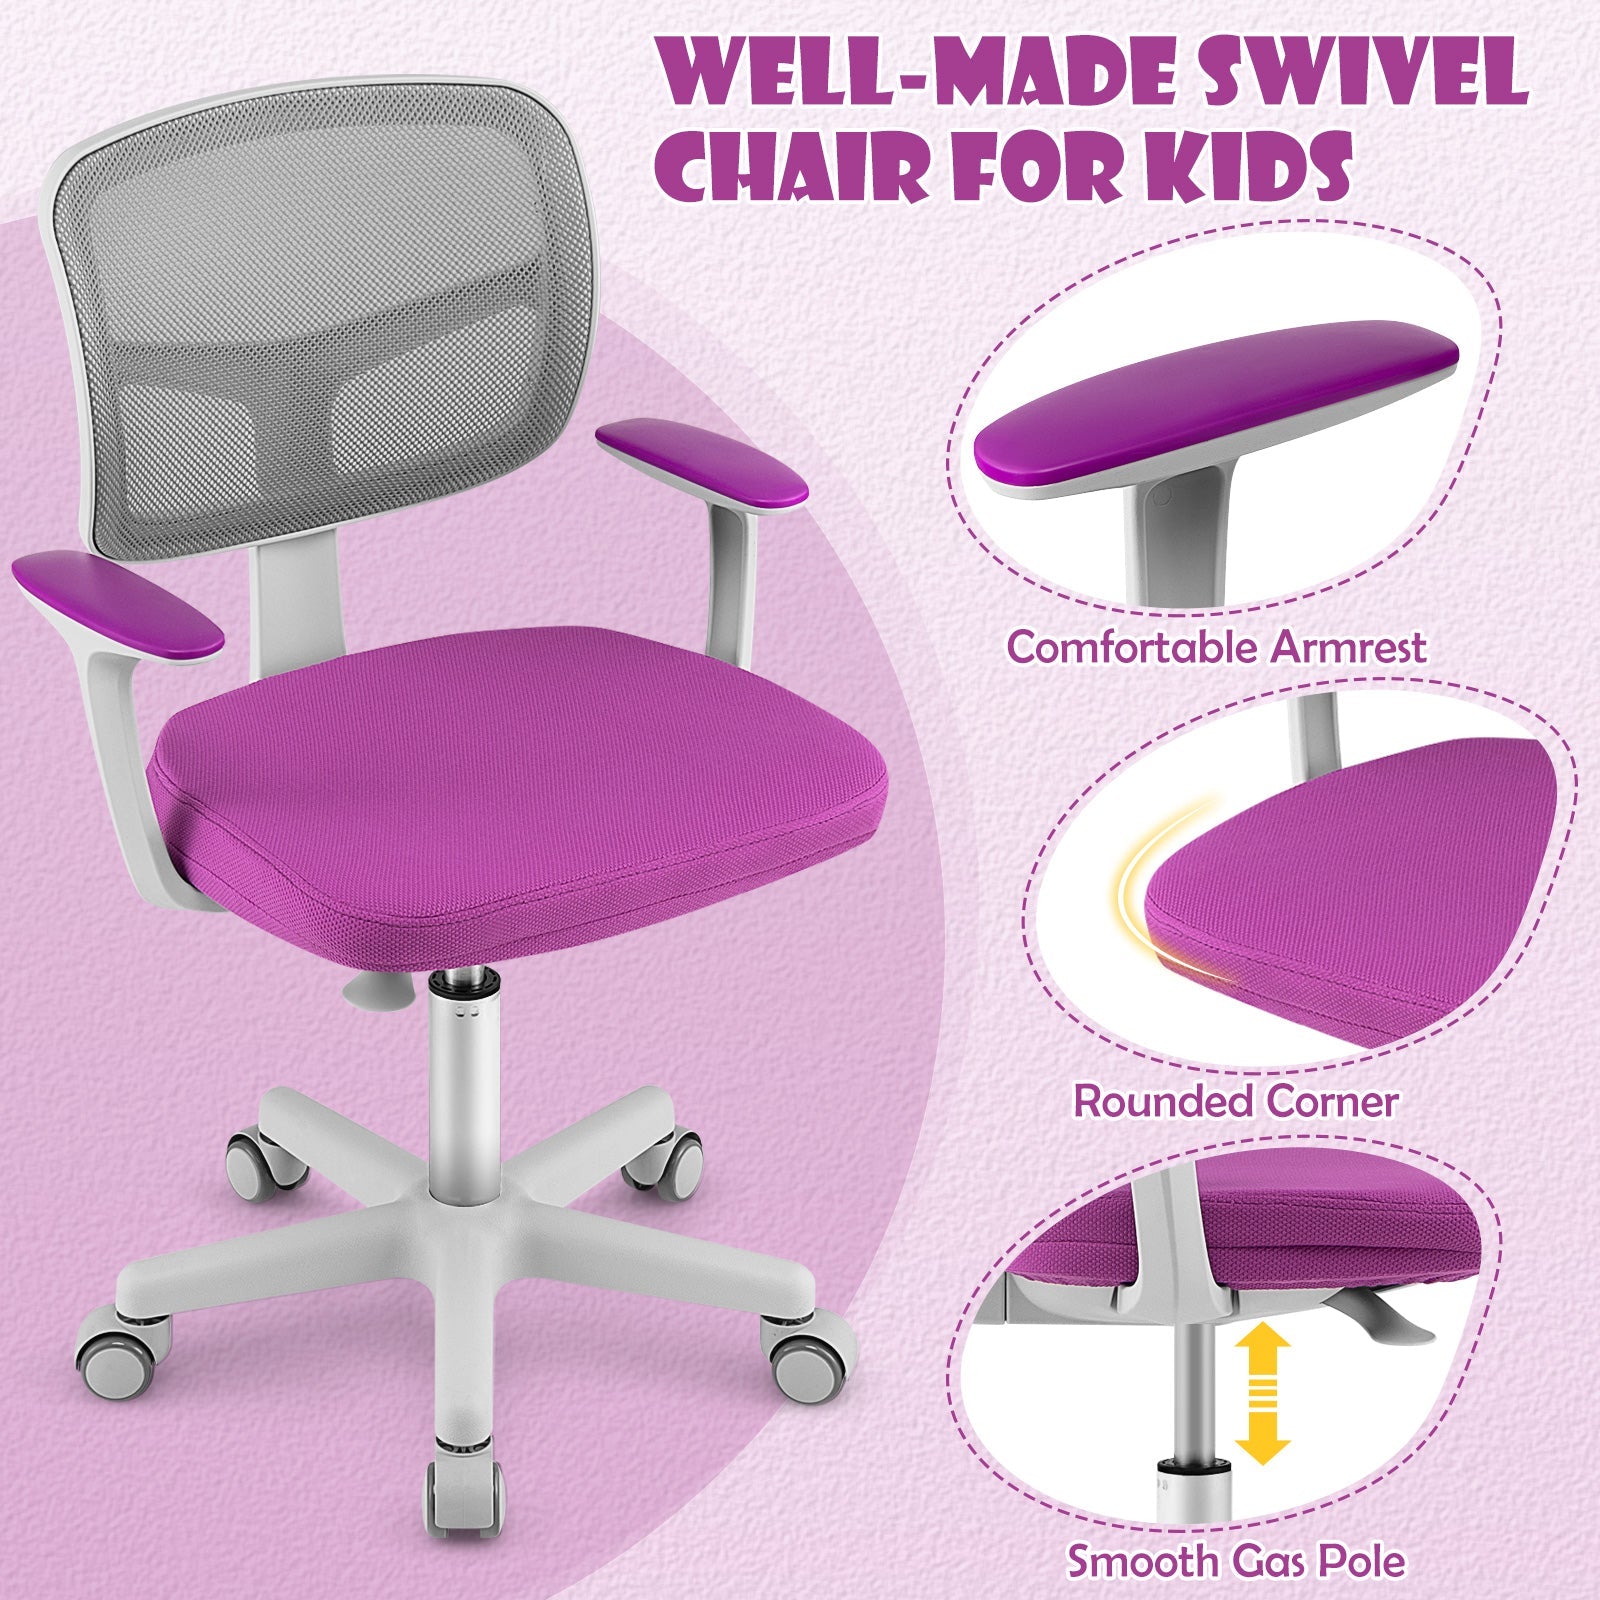 Ergonomic Kids Chair - Height Adjustable and 360° Swivel Seating